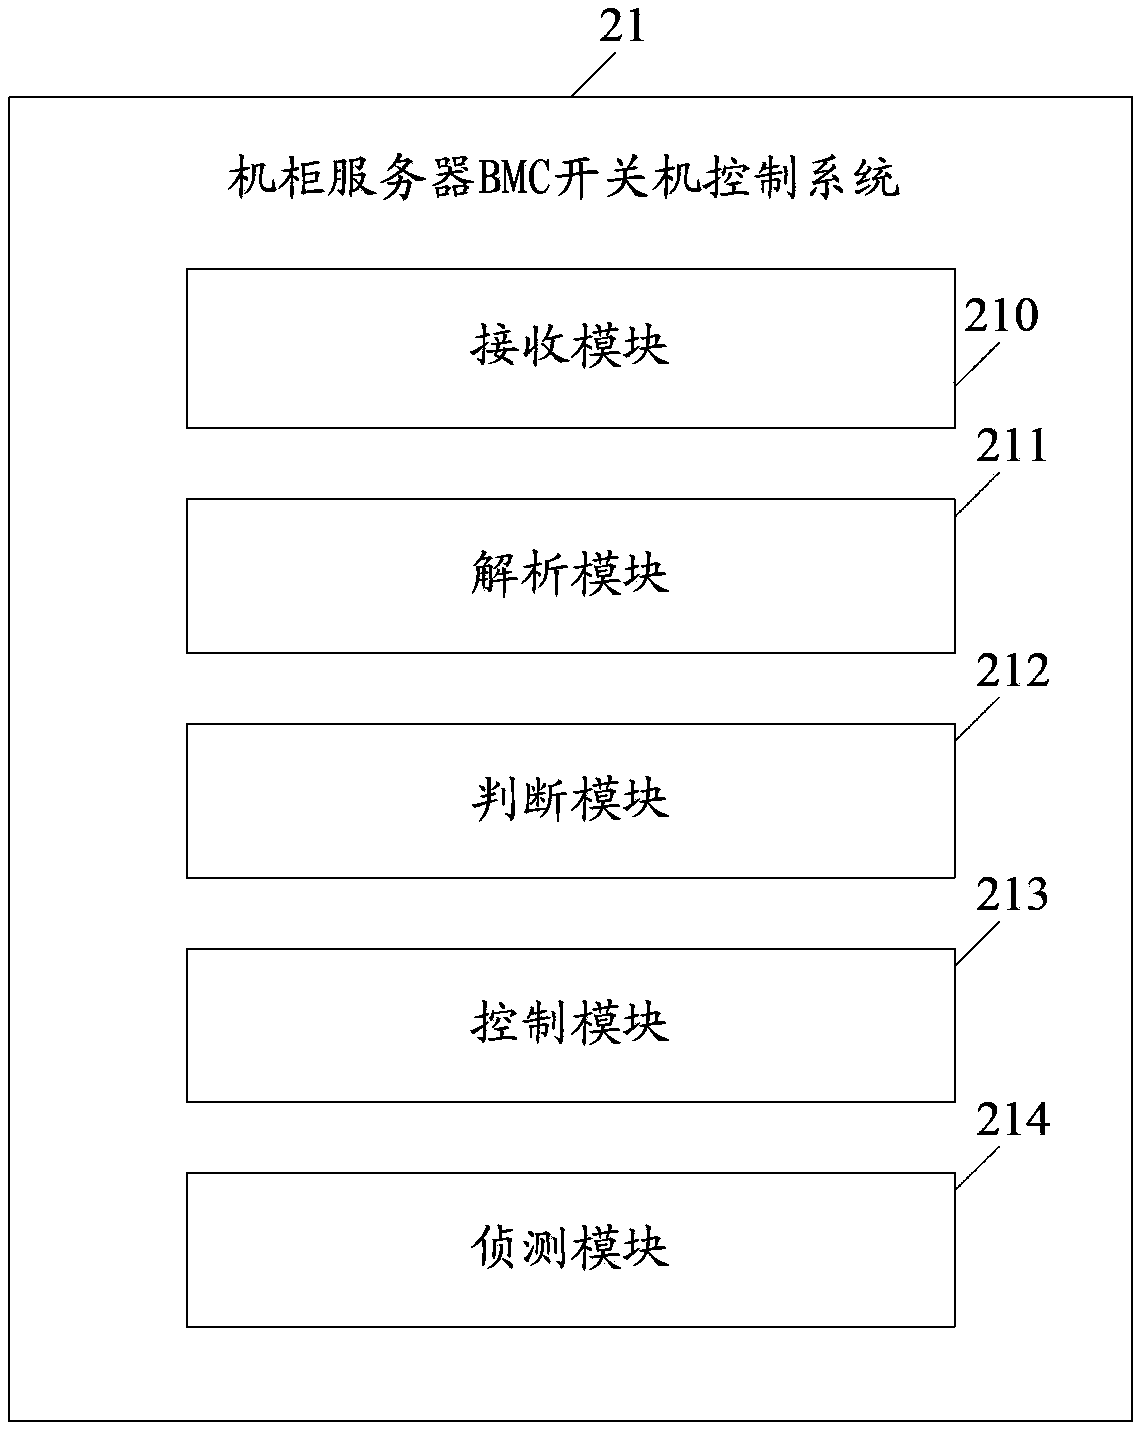 Cabinet server BMC startup and shutdown control system and method